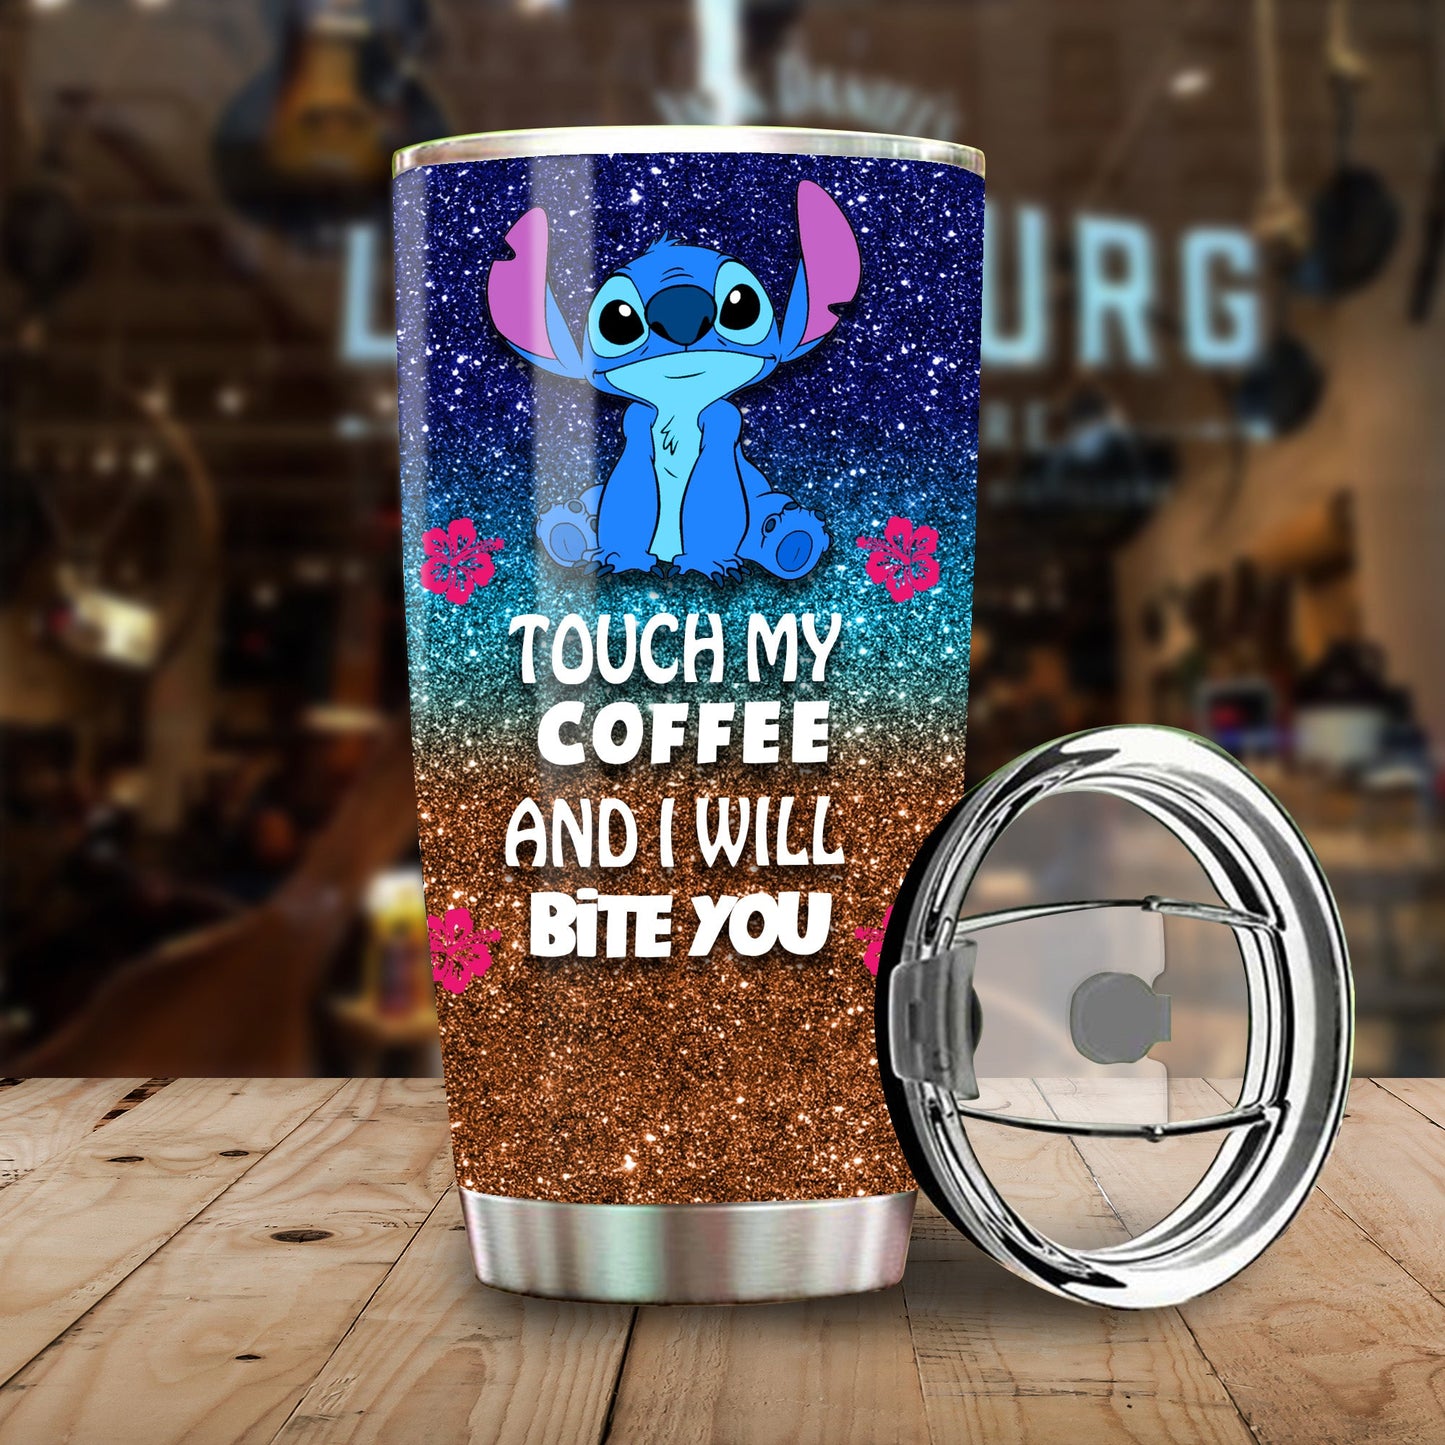 Unifinz Stitch Tumbler Touch My Coffee And I Will Bite You Tumbler Cup Cute Funny DN Stitch Travel Mug 2022